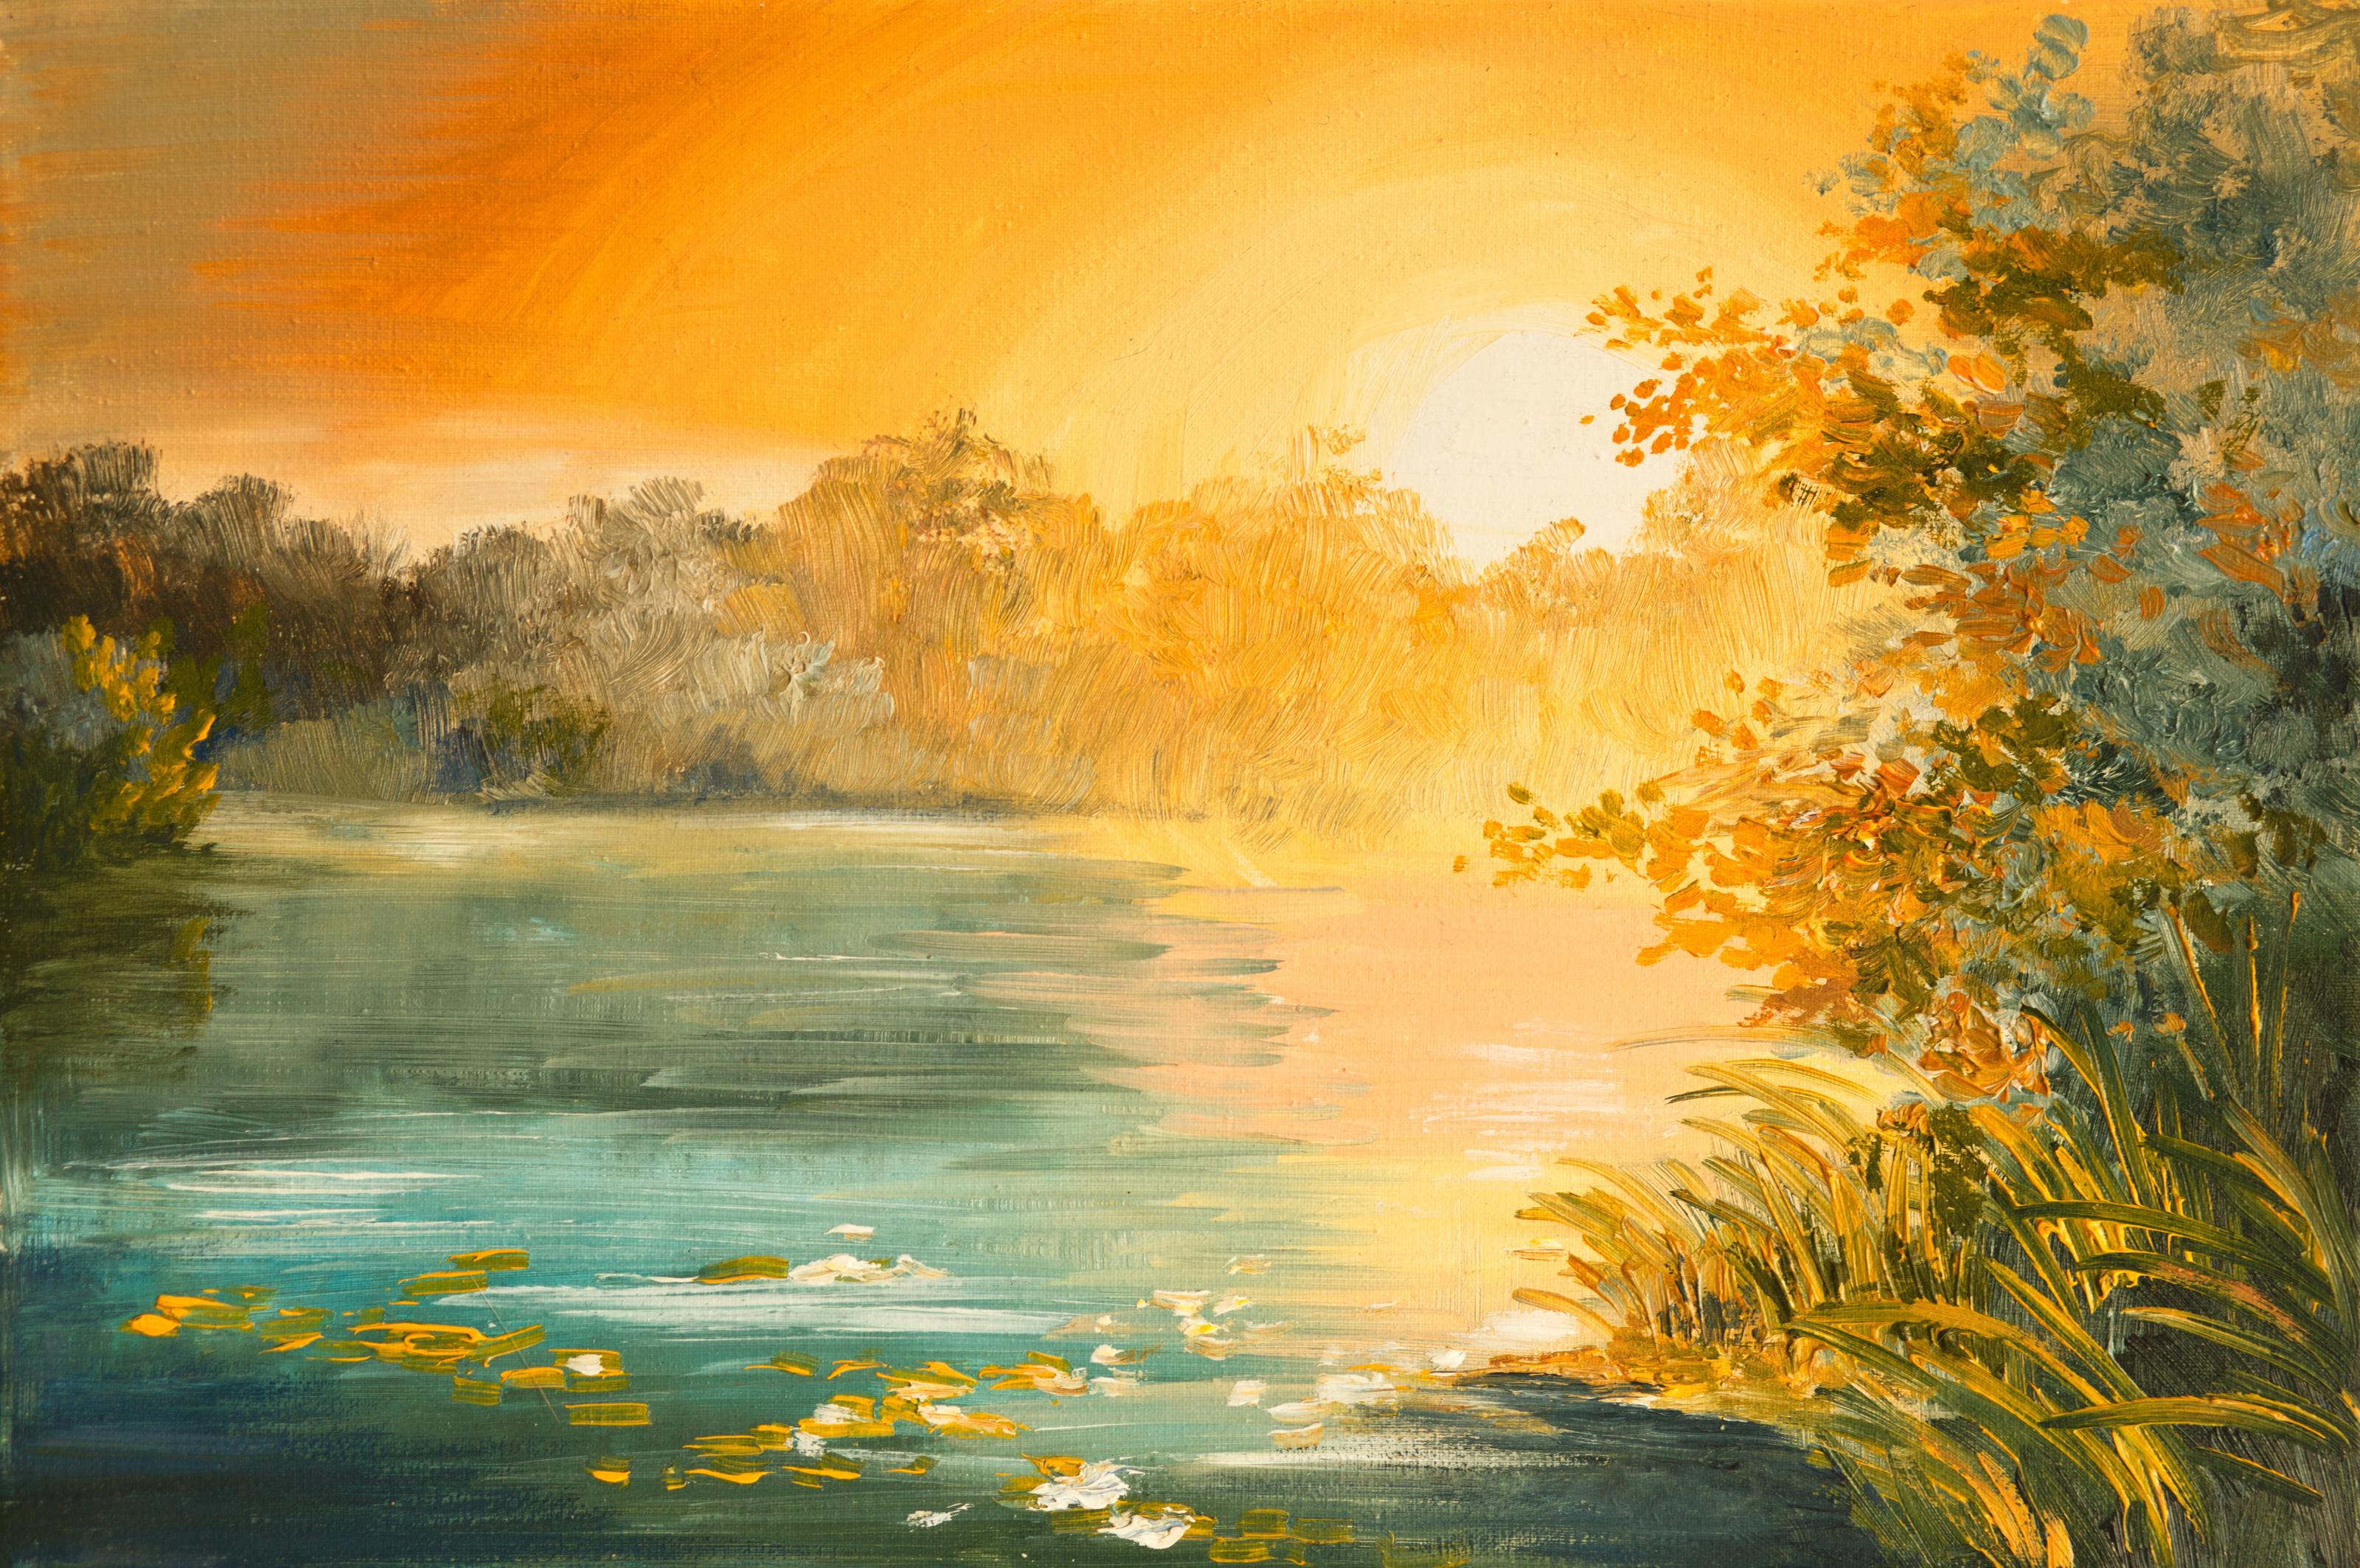 Sunset On The Lake Oil Painting Wallpaper Mural Murals Your Way